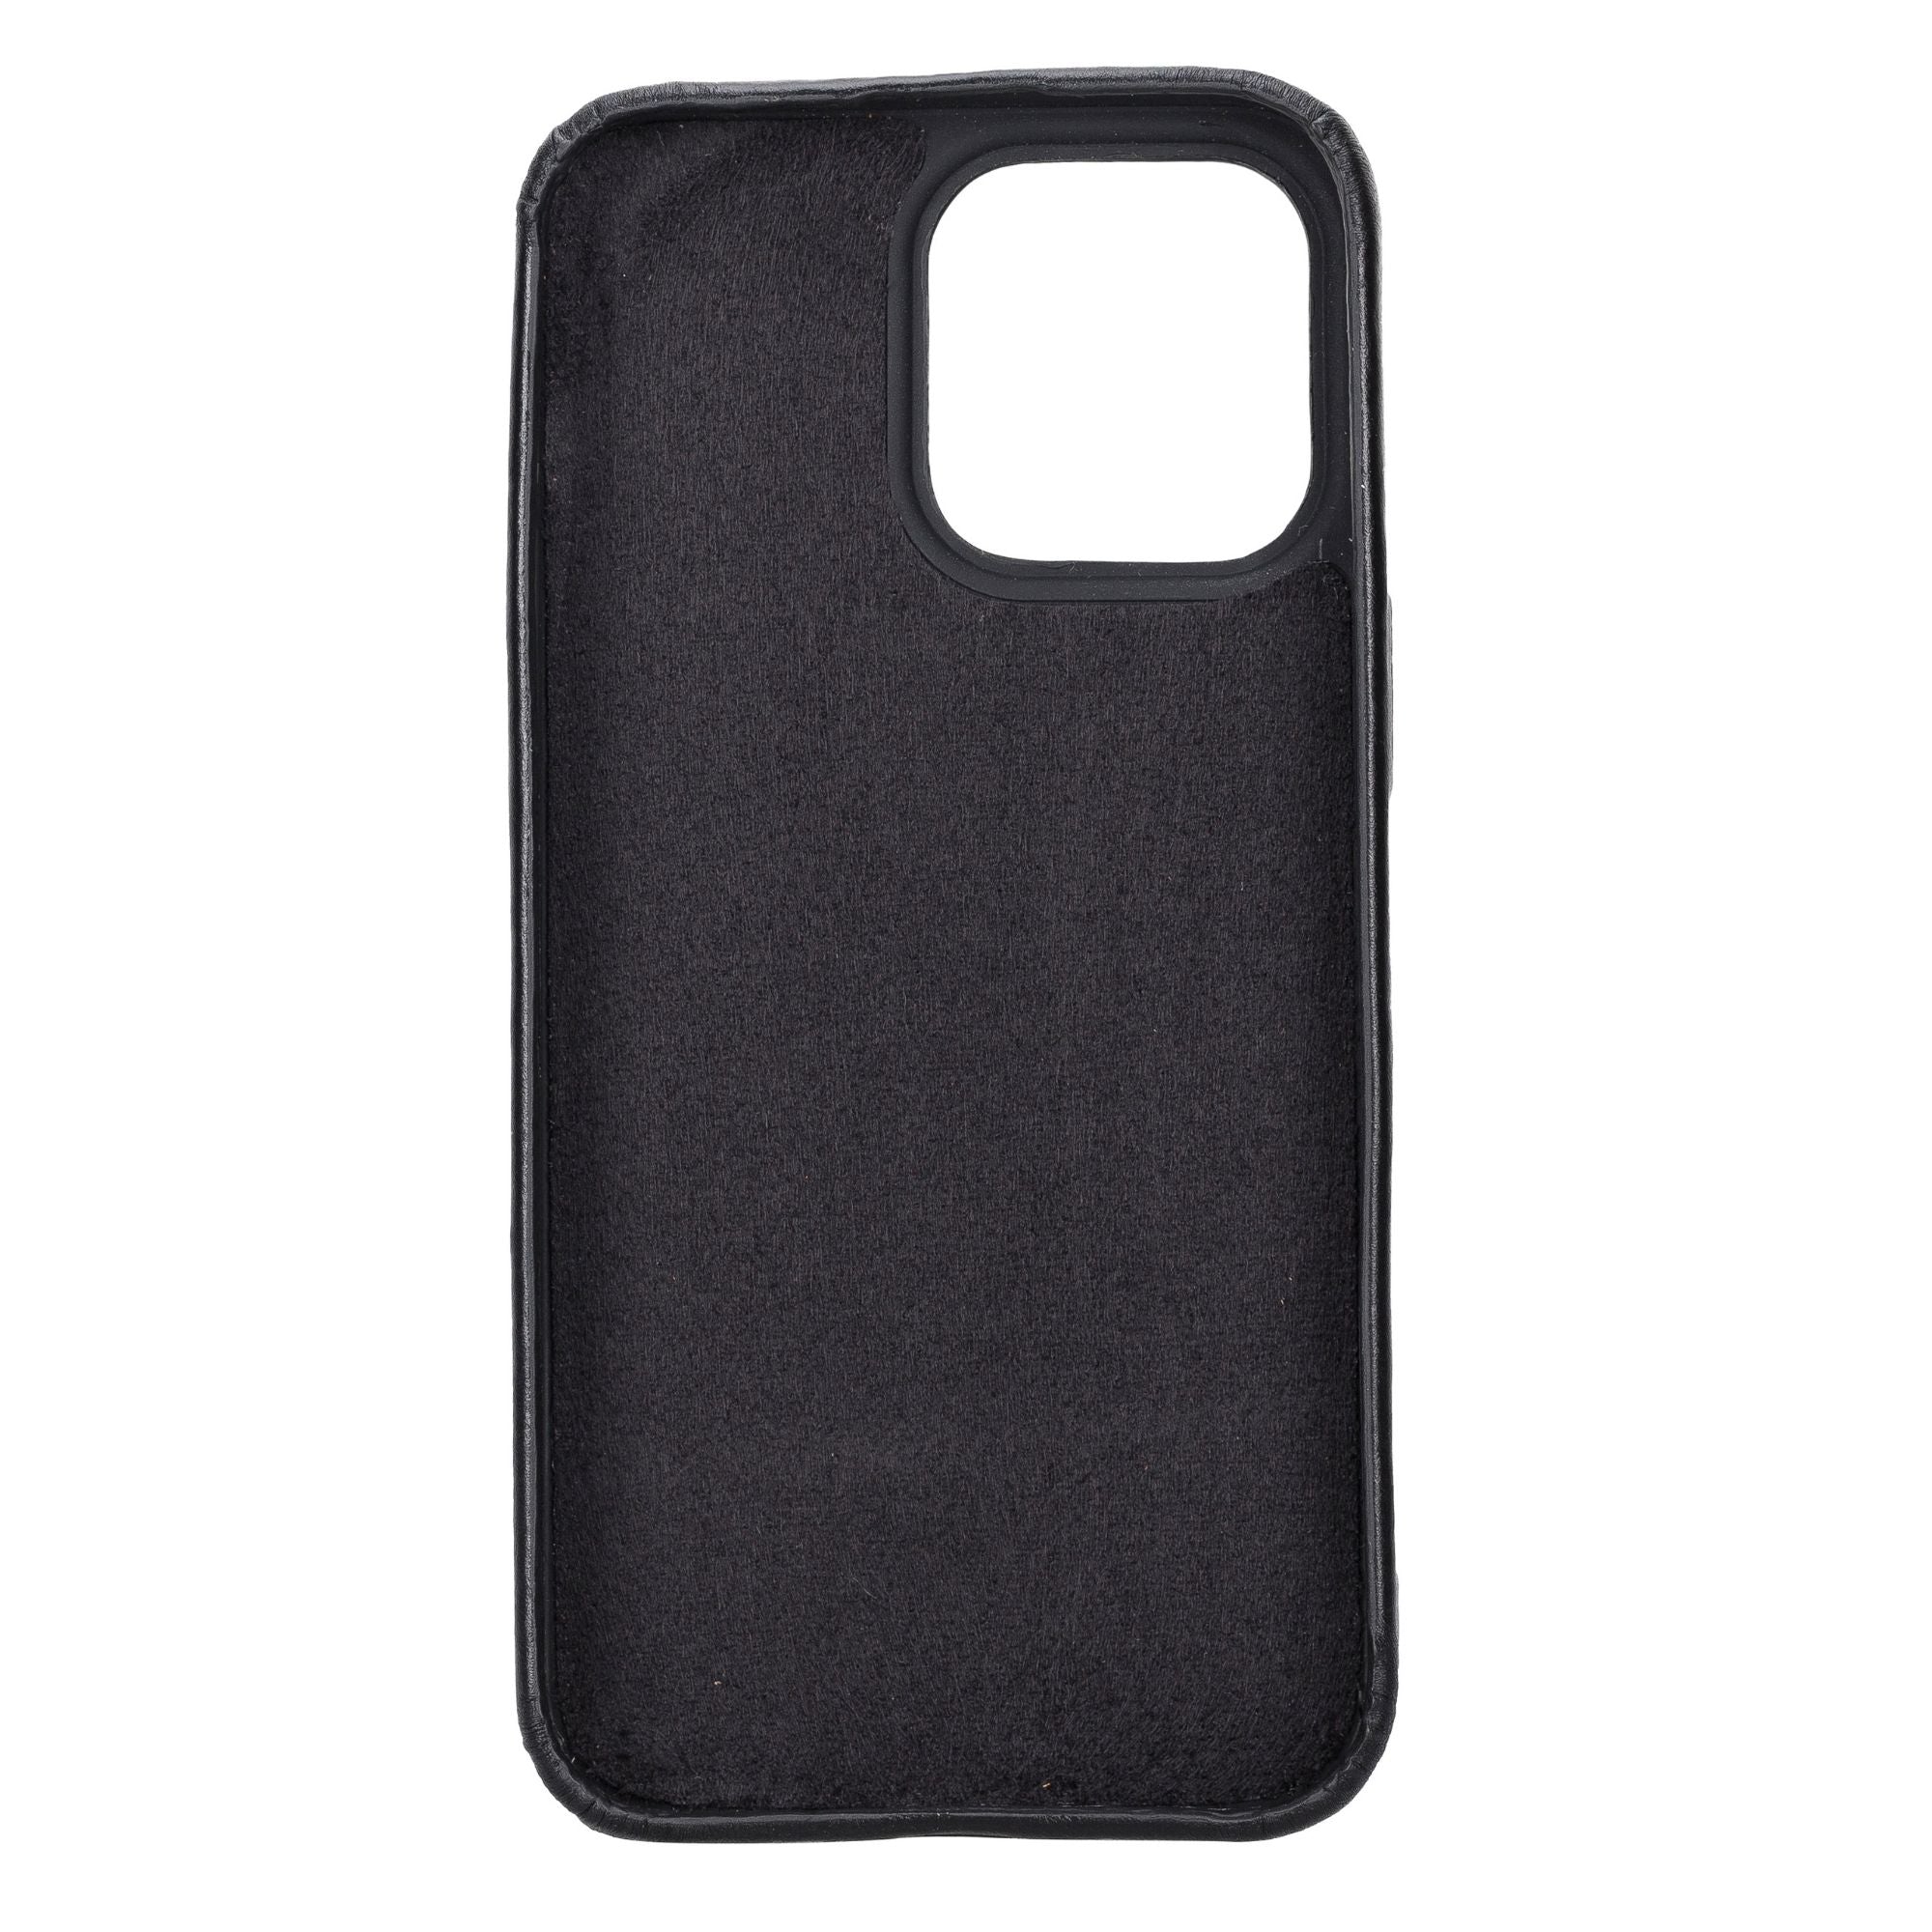 Pinedale Leather Snap-on Case for iPhone 11 Series - iPhone 11 Pro Max - Black - TORONATA